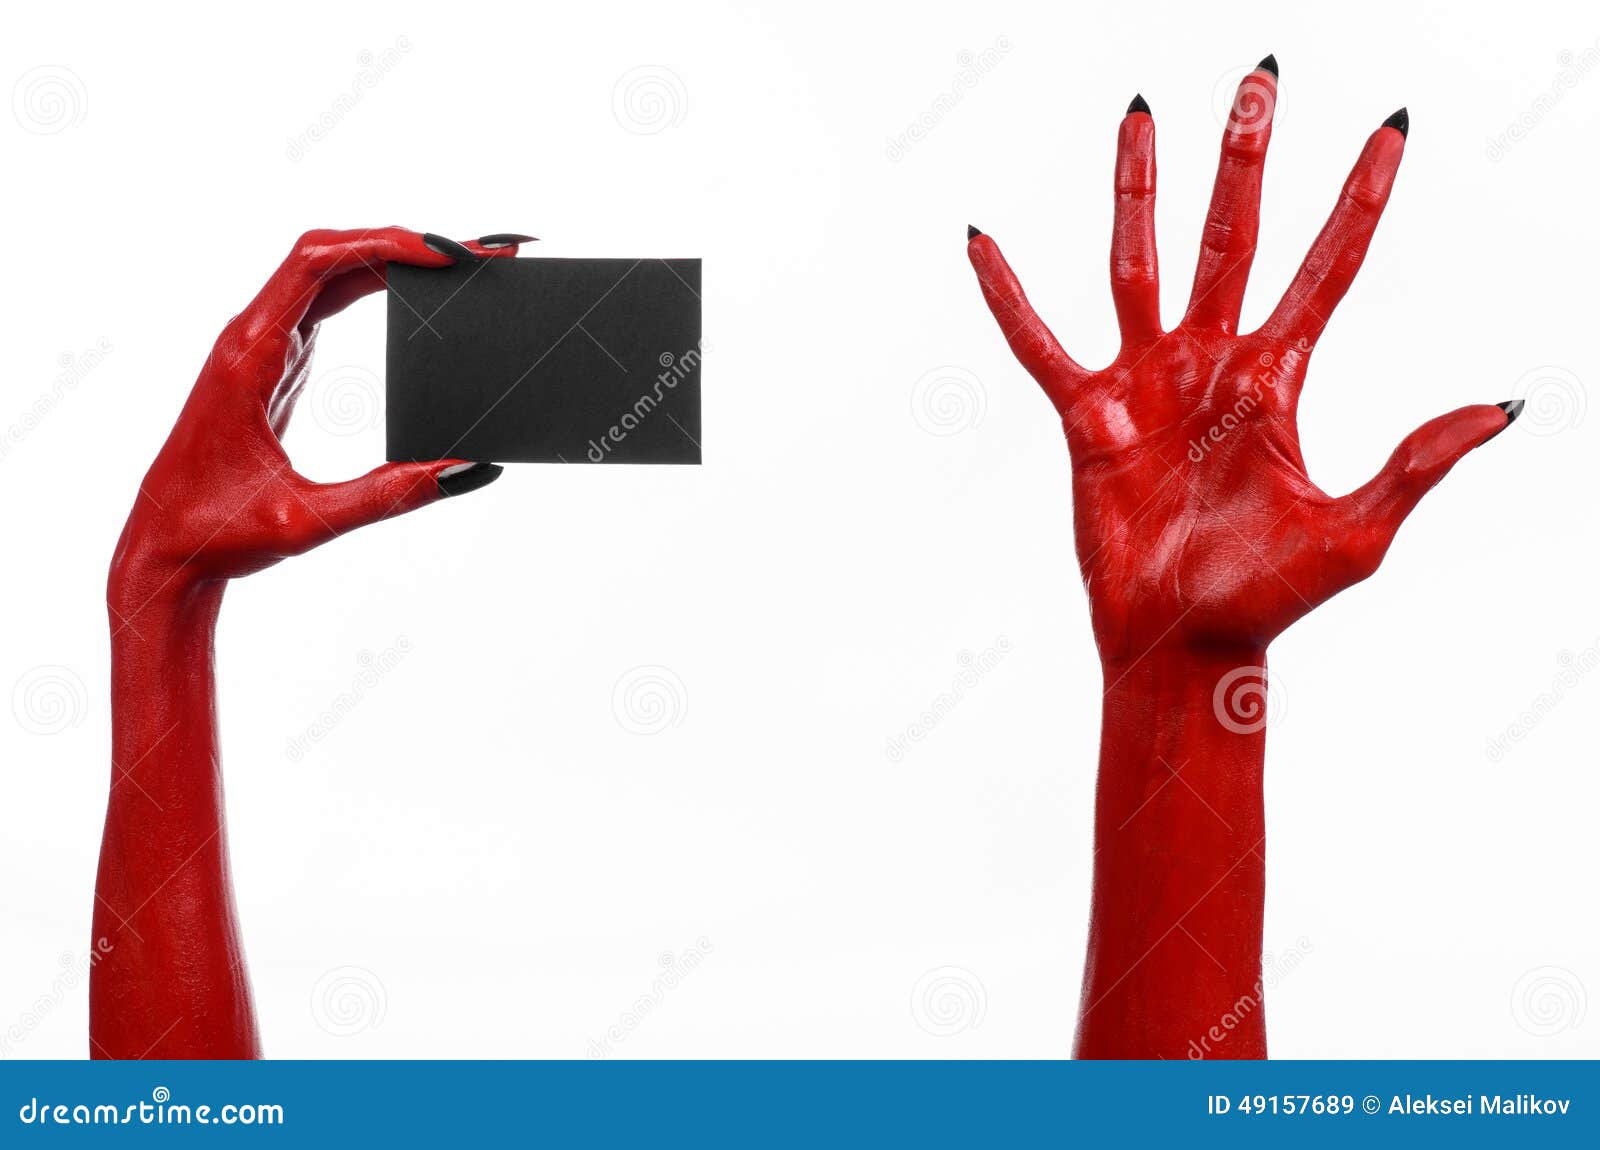 Halloween Theme: Red Devil Hand With Black Nails Holding A ...